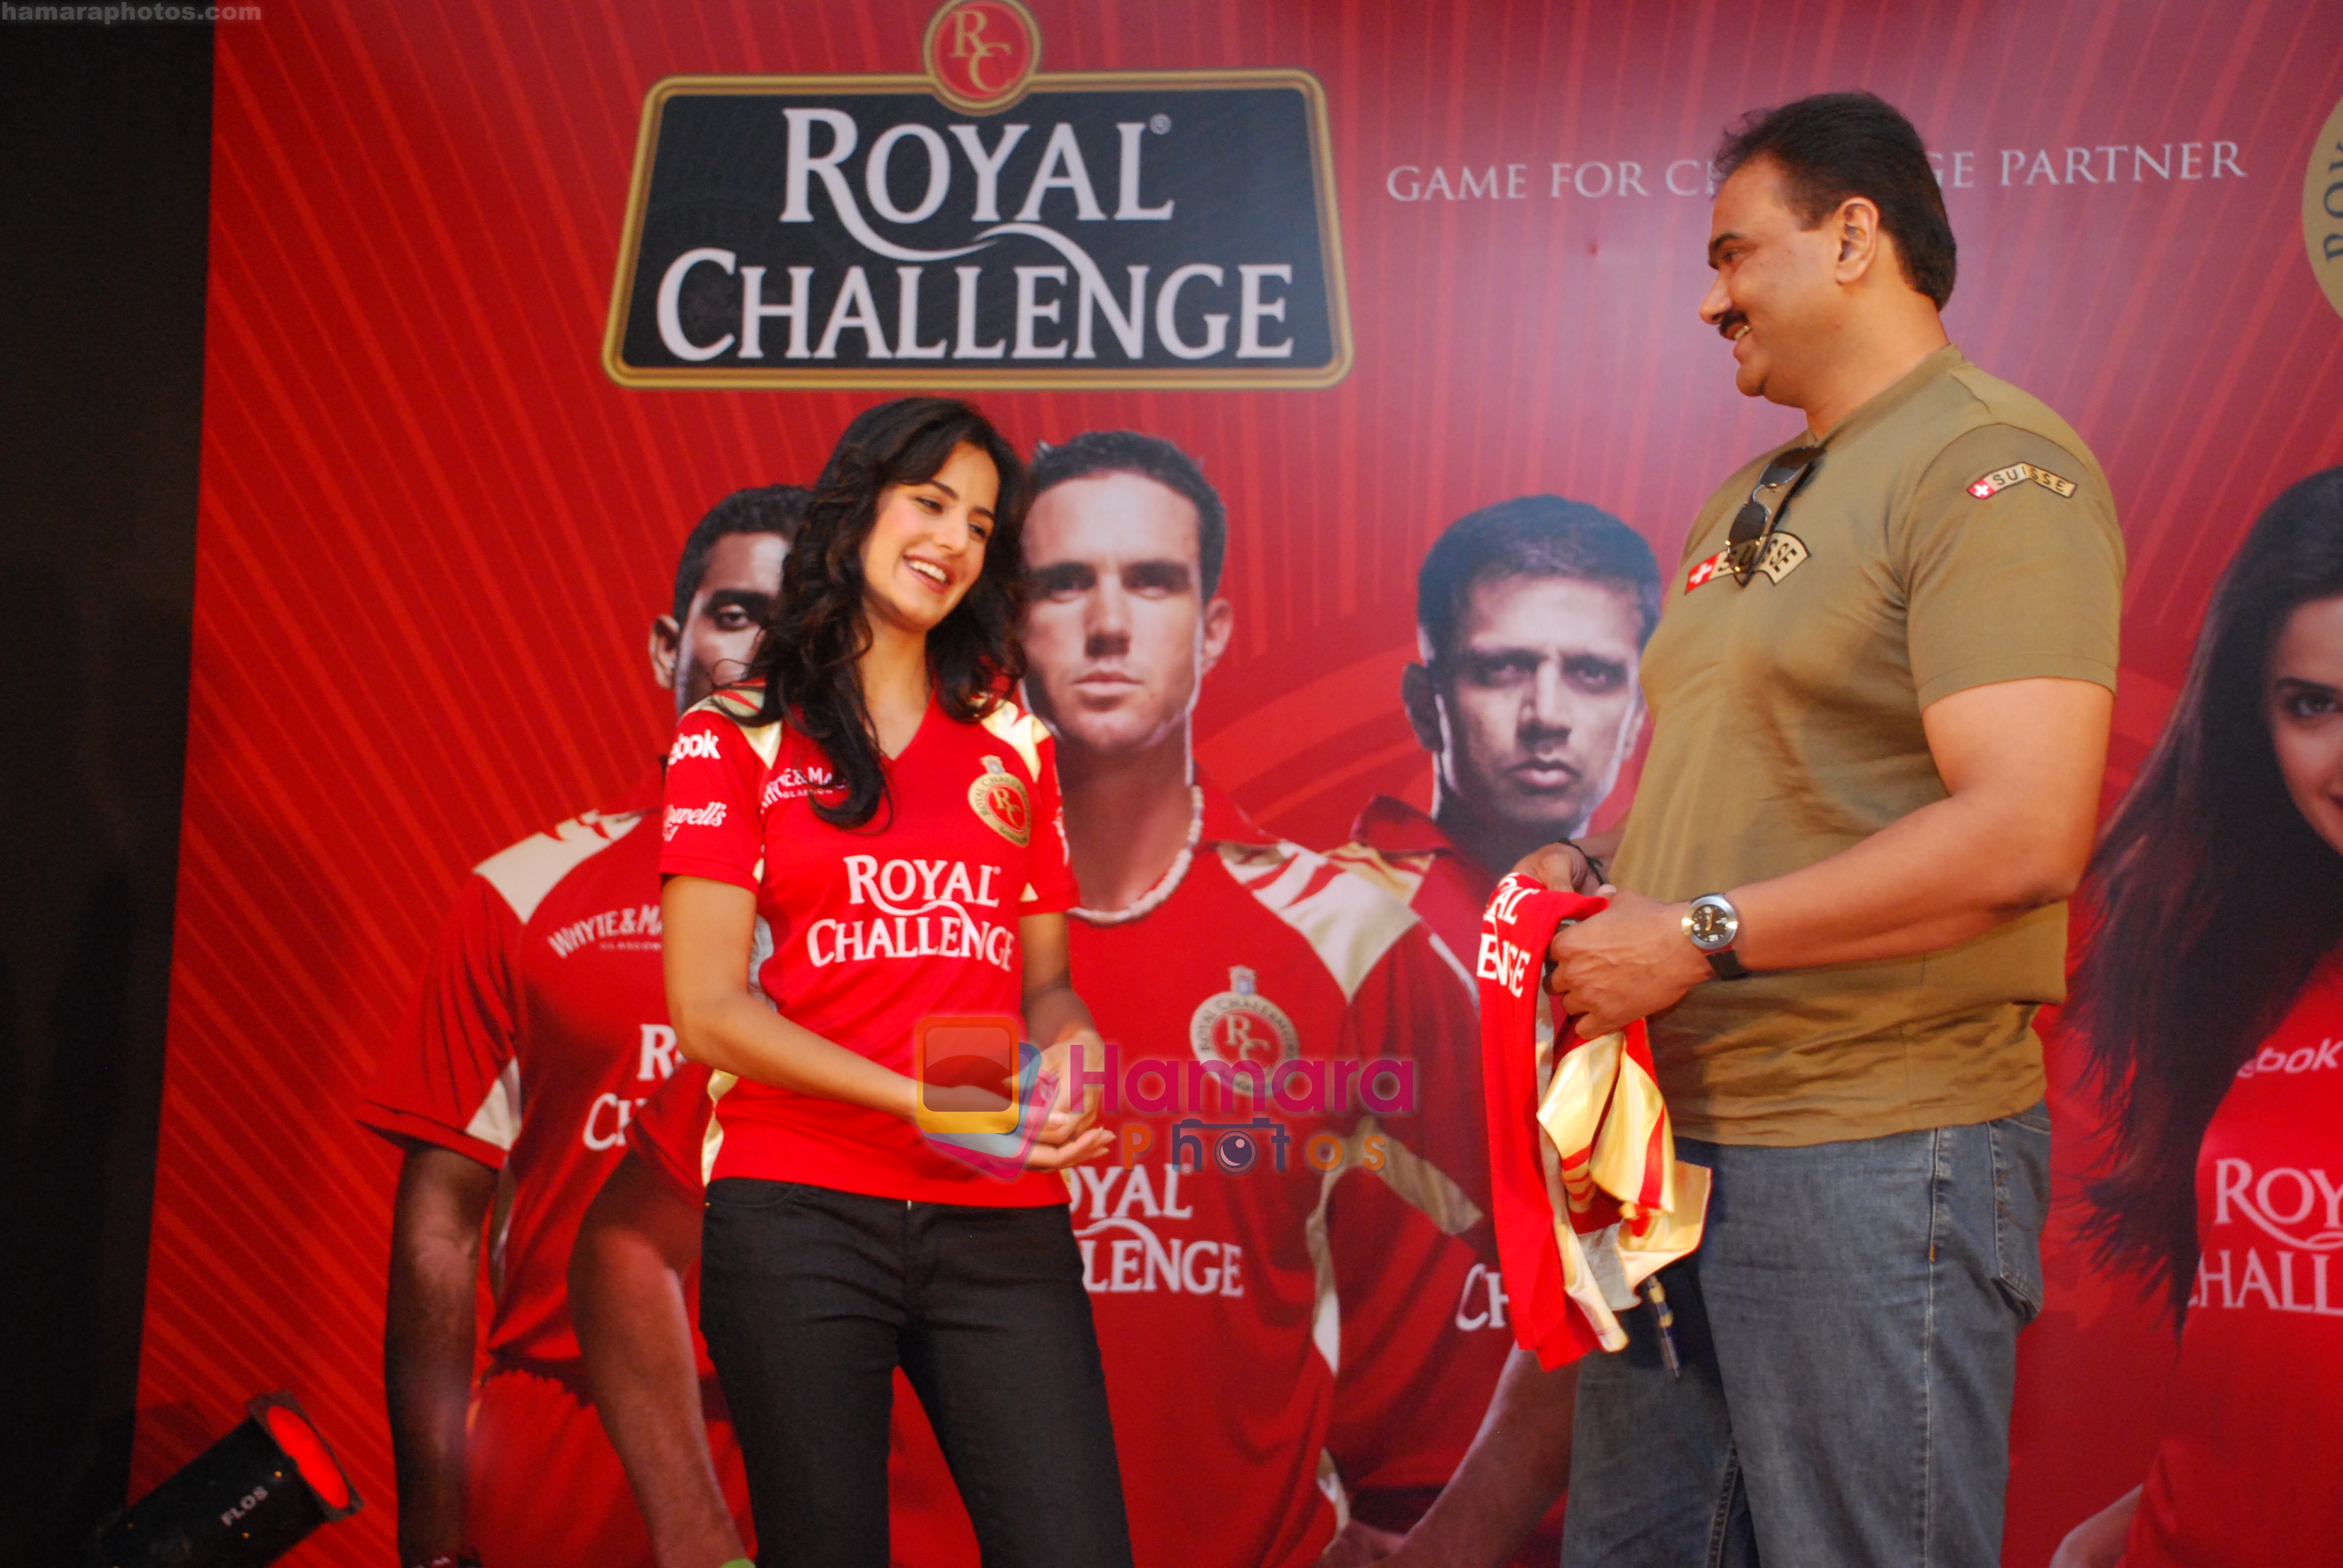 Katrina Kaif Brand Ambassador Royal Challengers with fans of the team at a promotional event in Mumbai  on Thursday 14th May 2009 